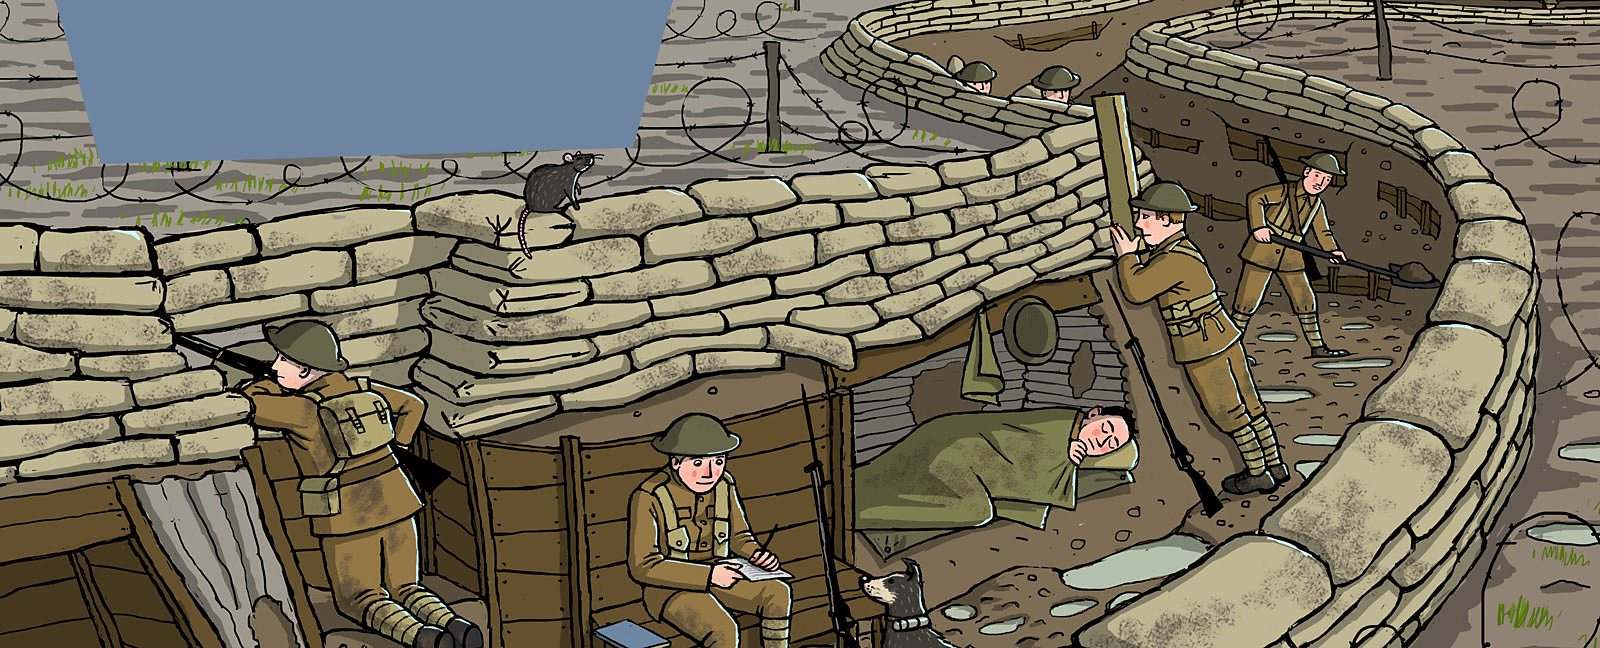 How Could Soldiers Live in a Trench?